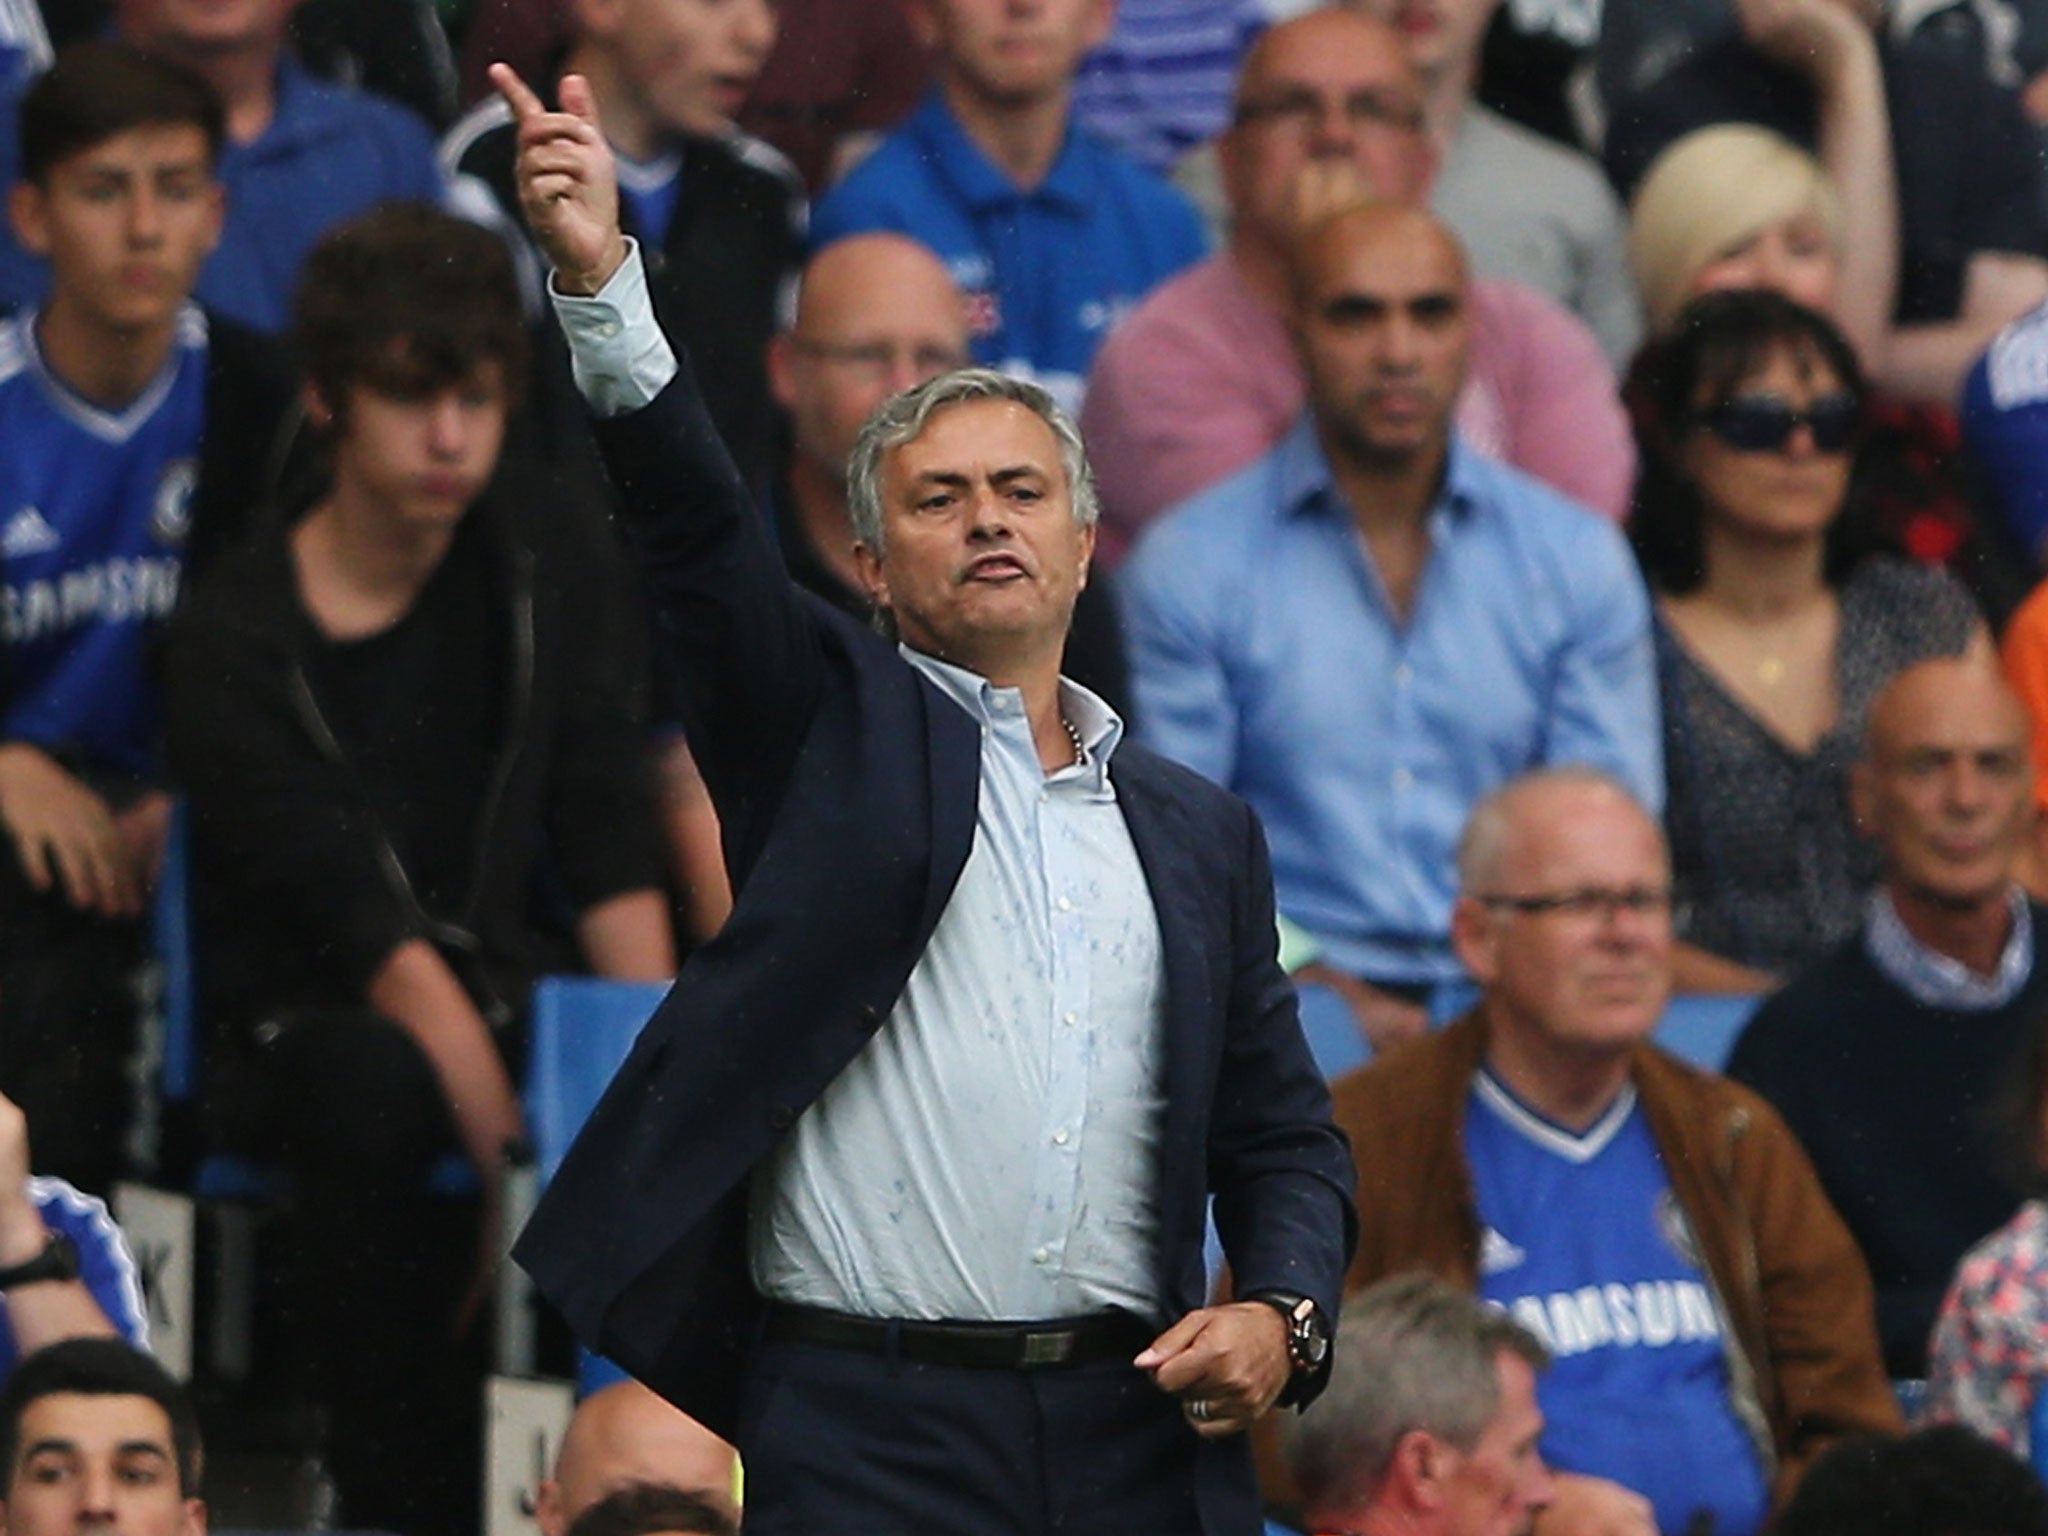 Jose Mourinho gestures from the sideline